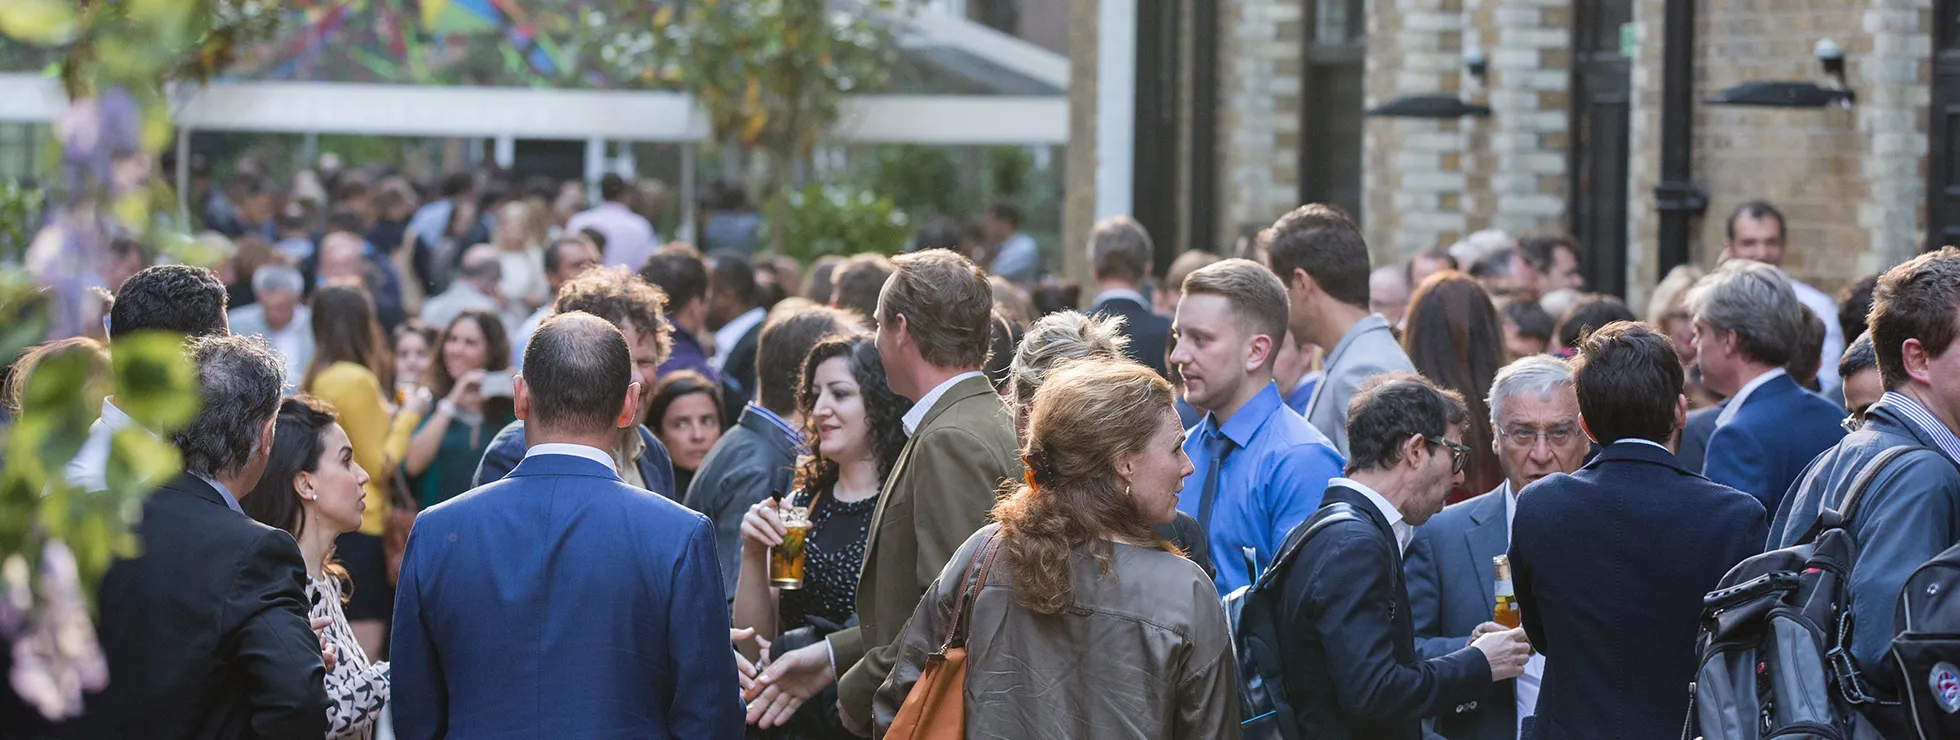 Garden party networking at the Brewery in London